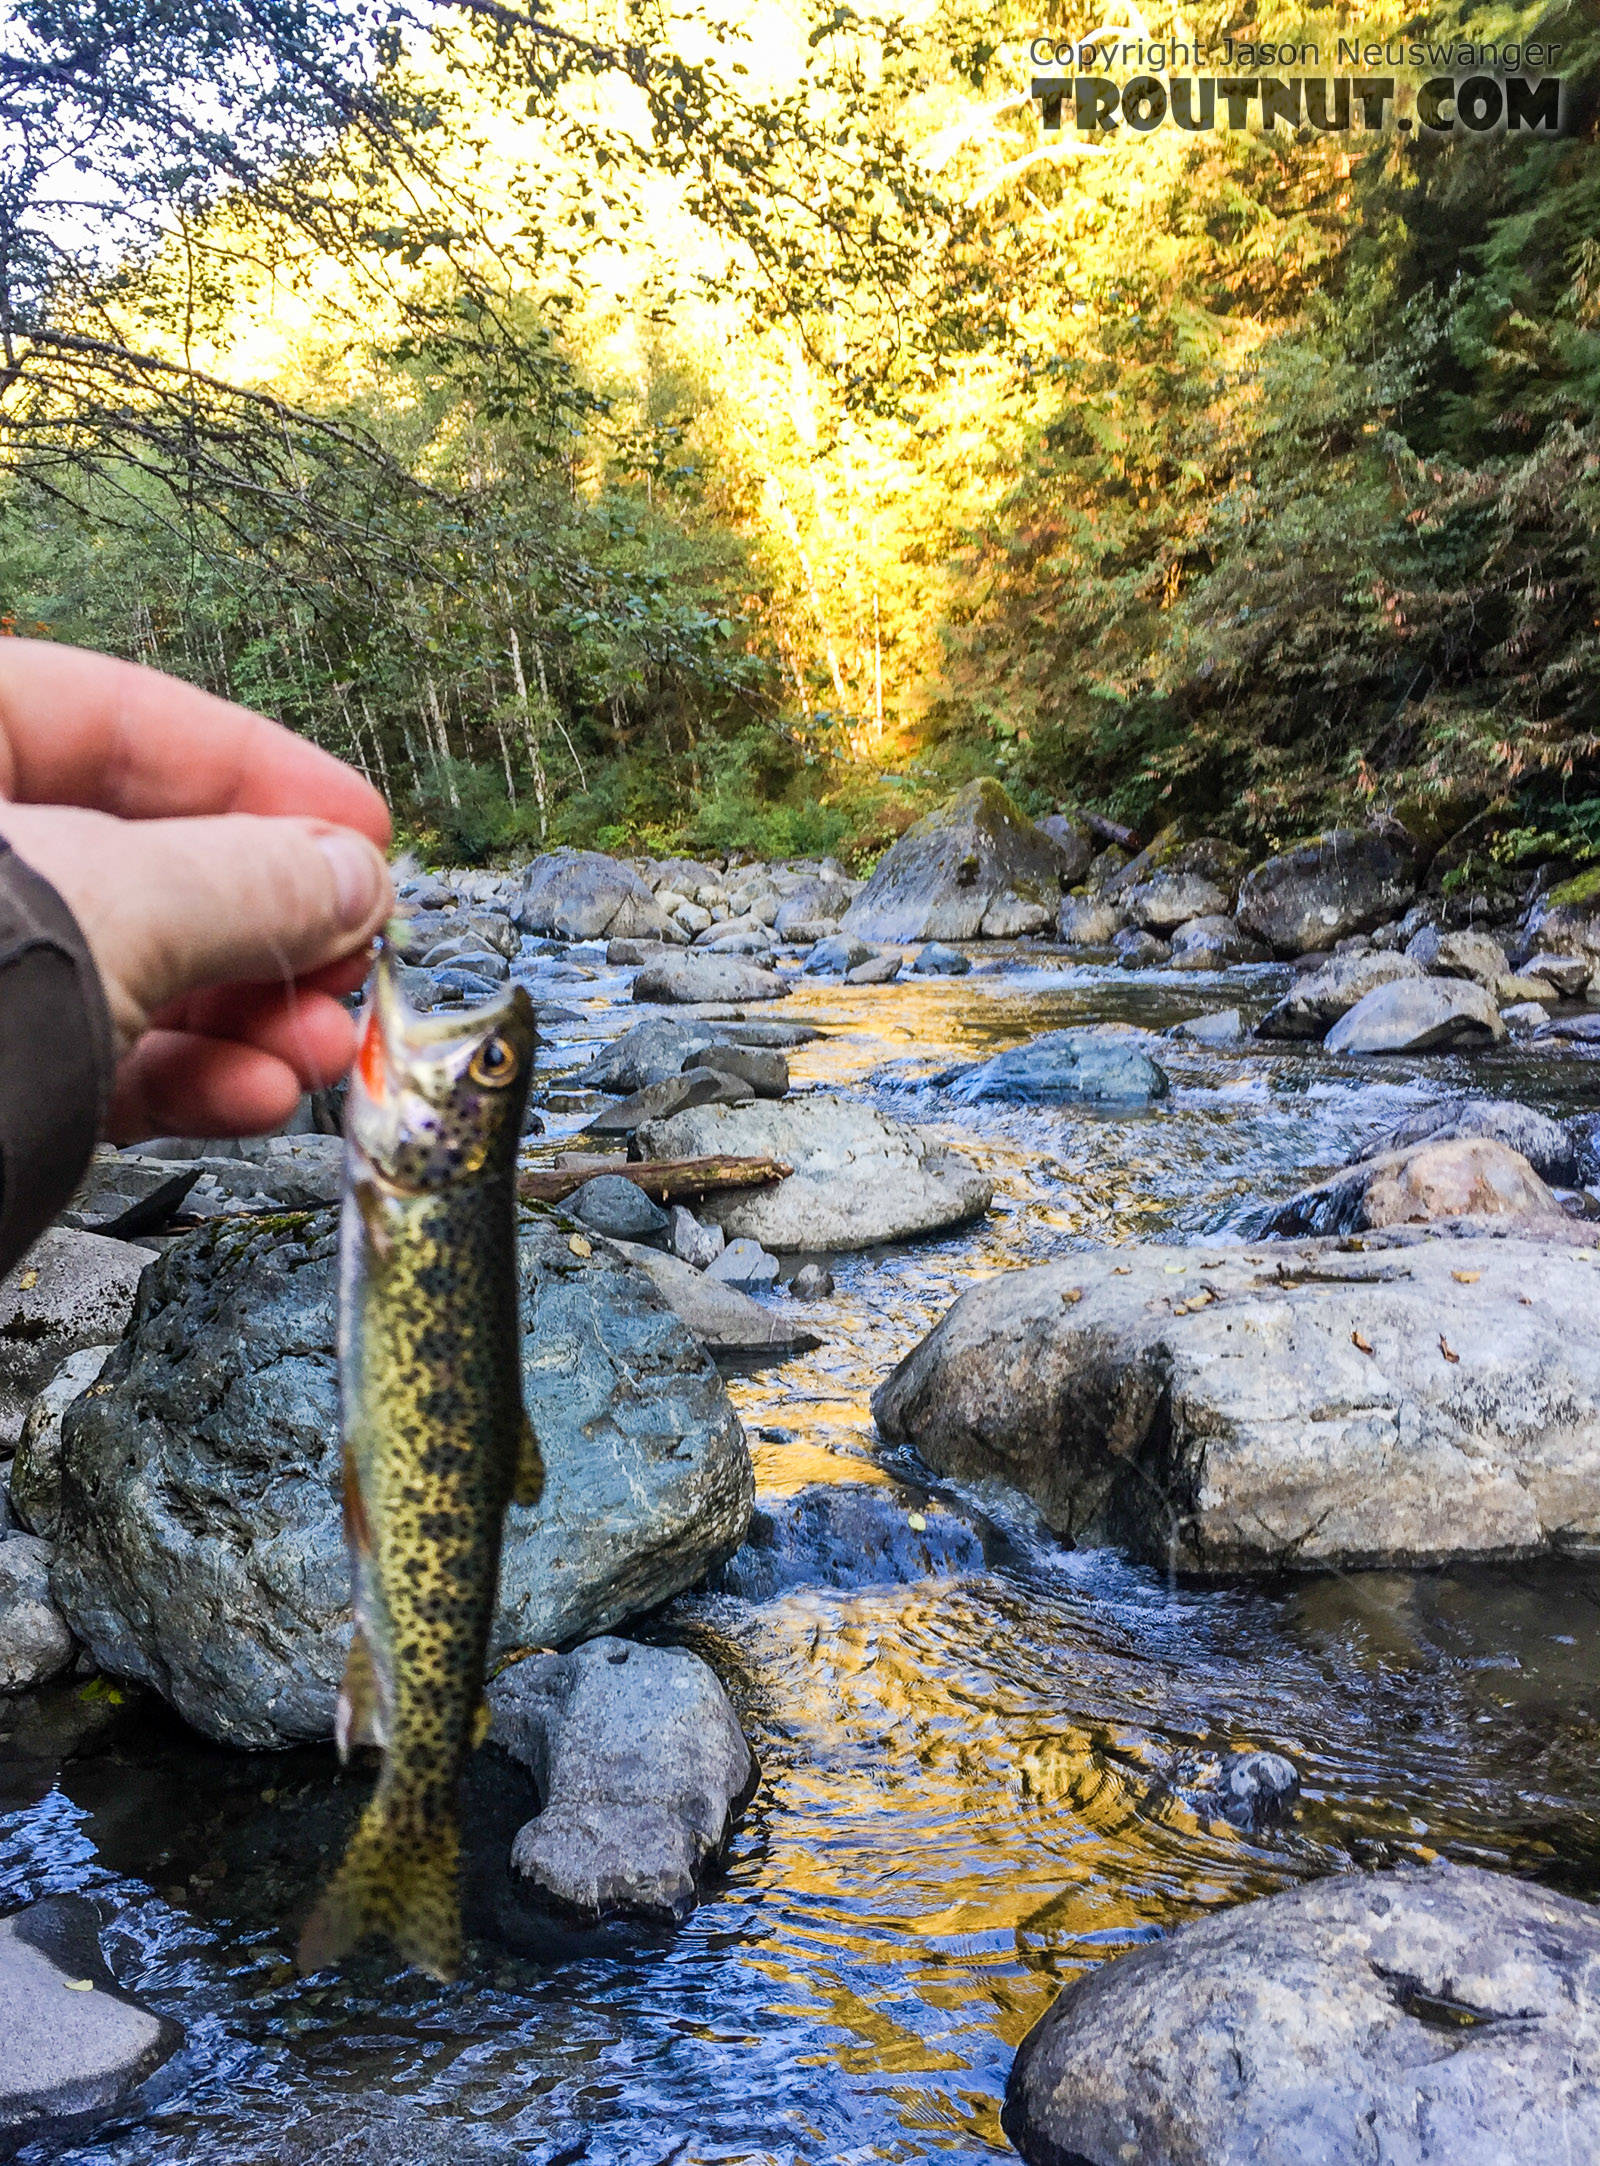  From the Taylor River in Washington.